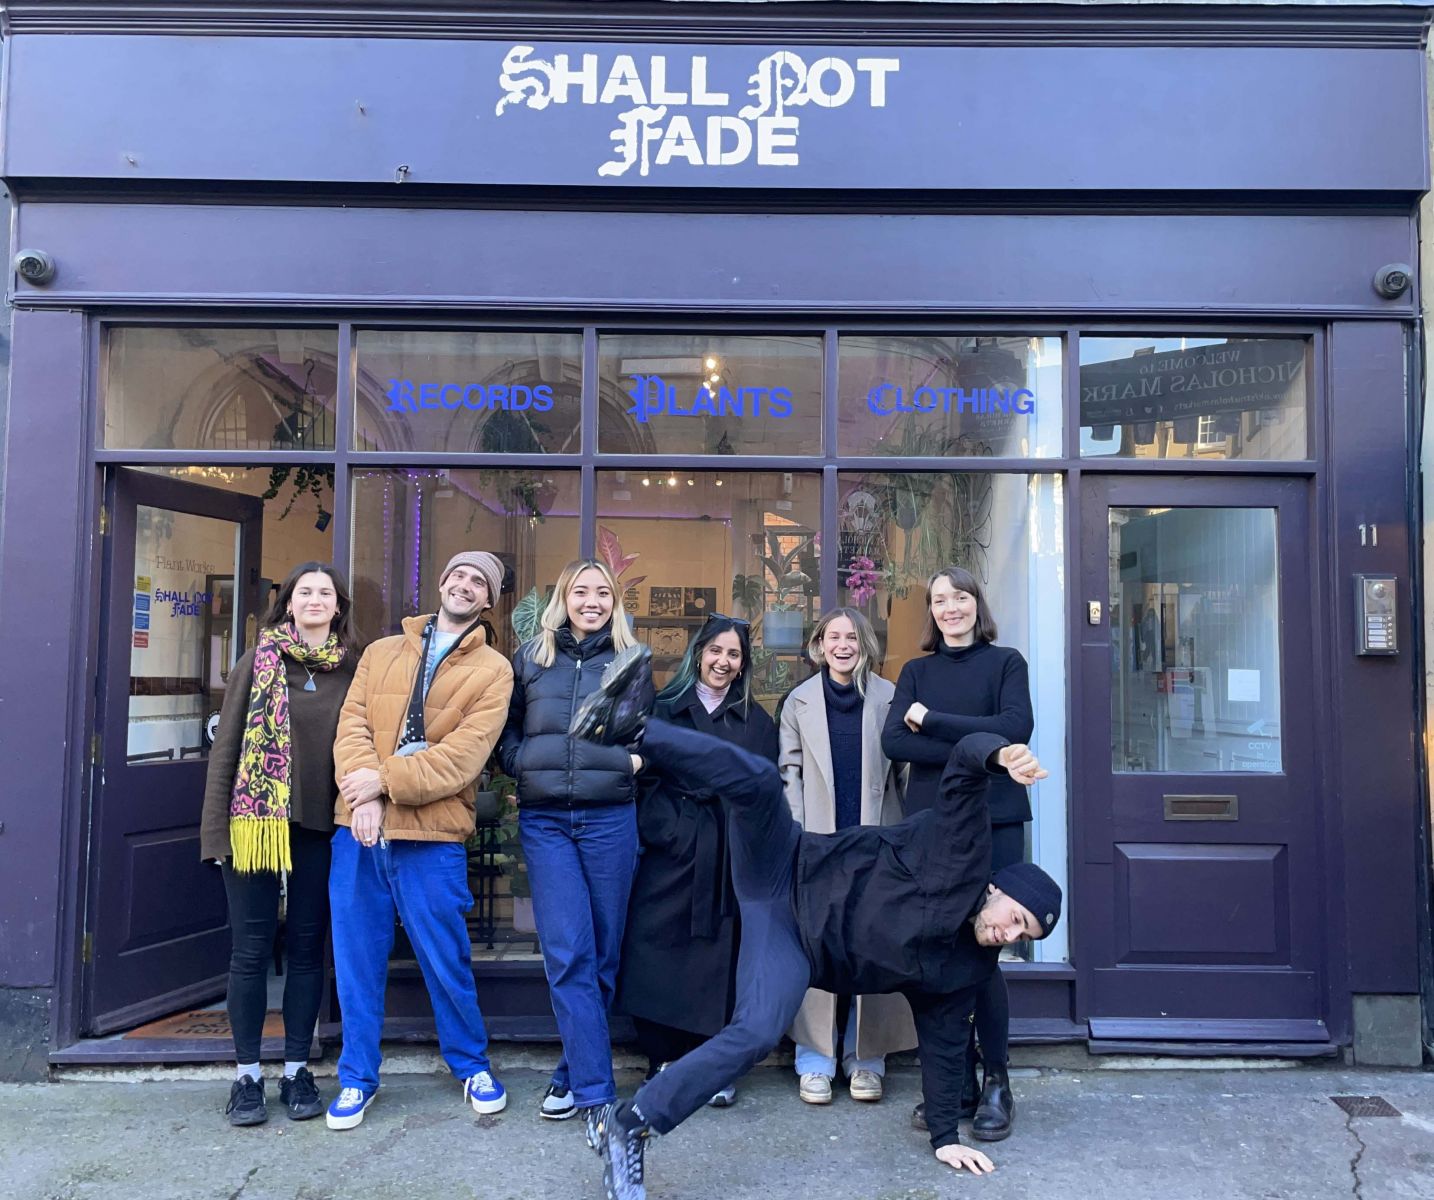 The Shall Not Fade team outside their flagship store in St Nicks.